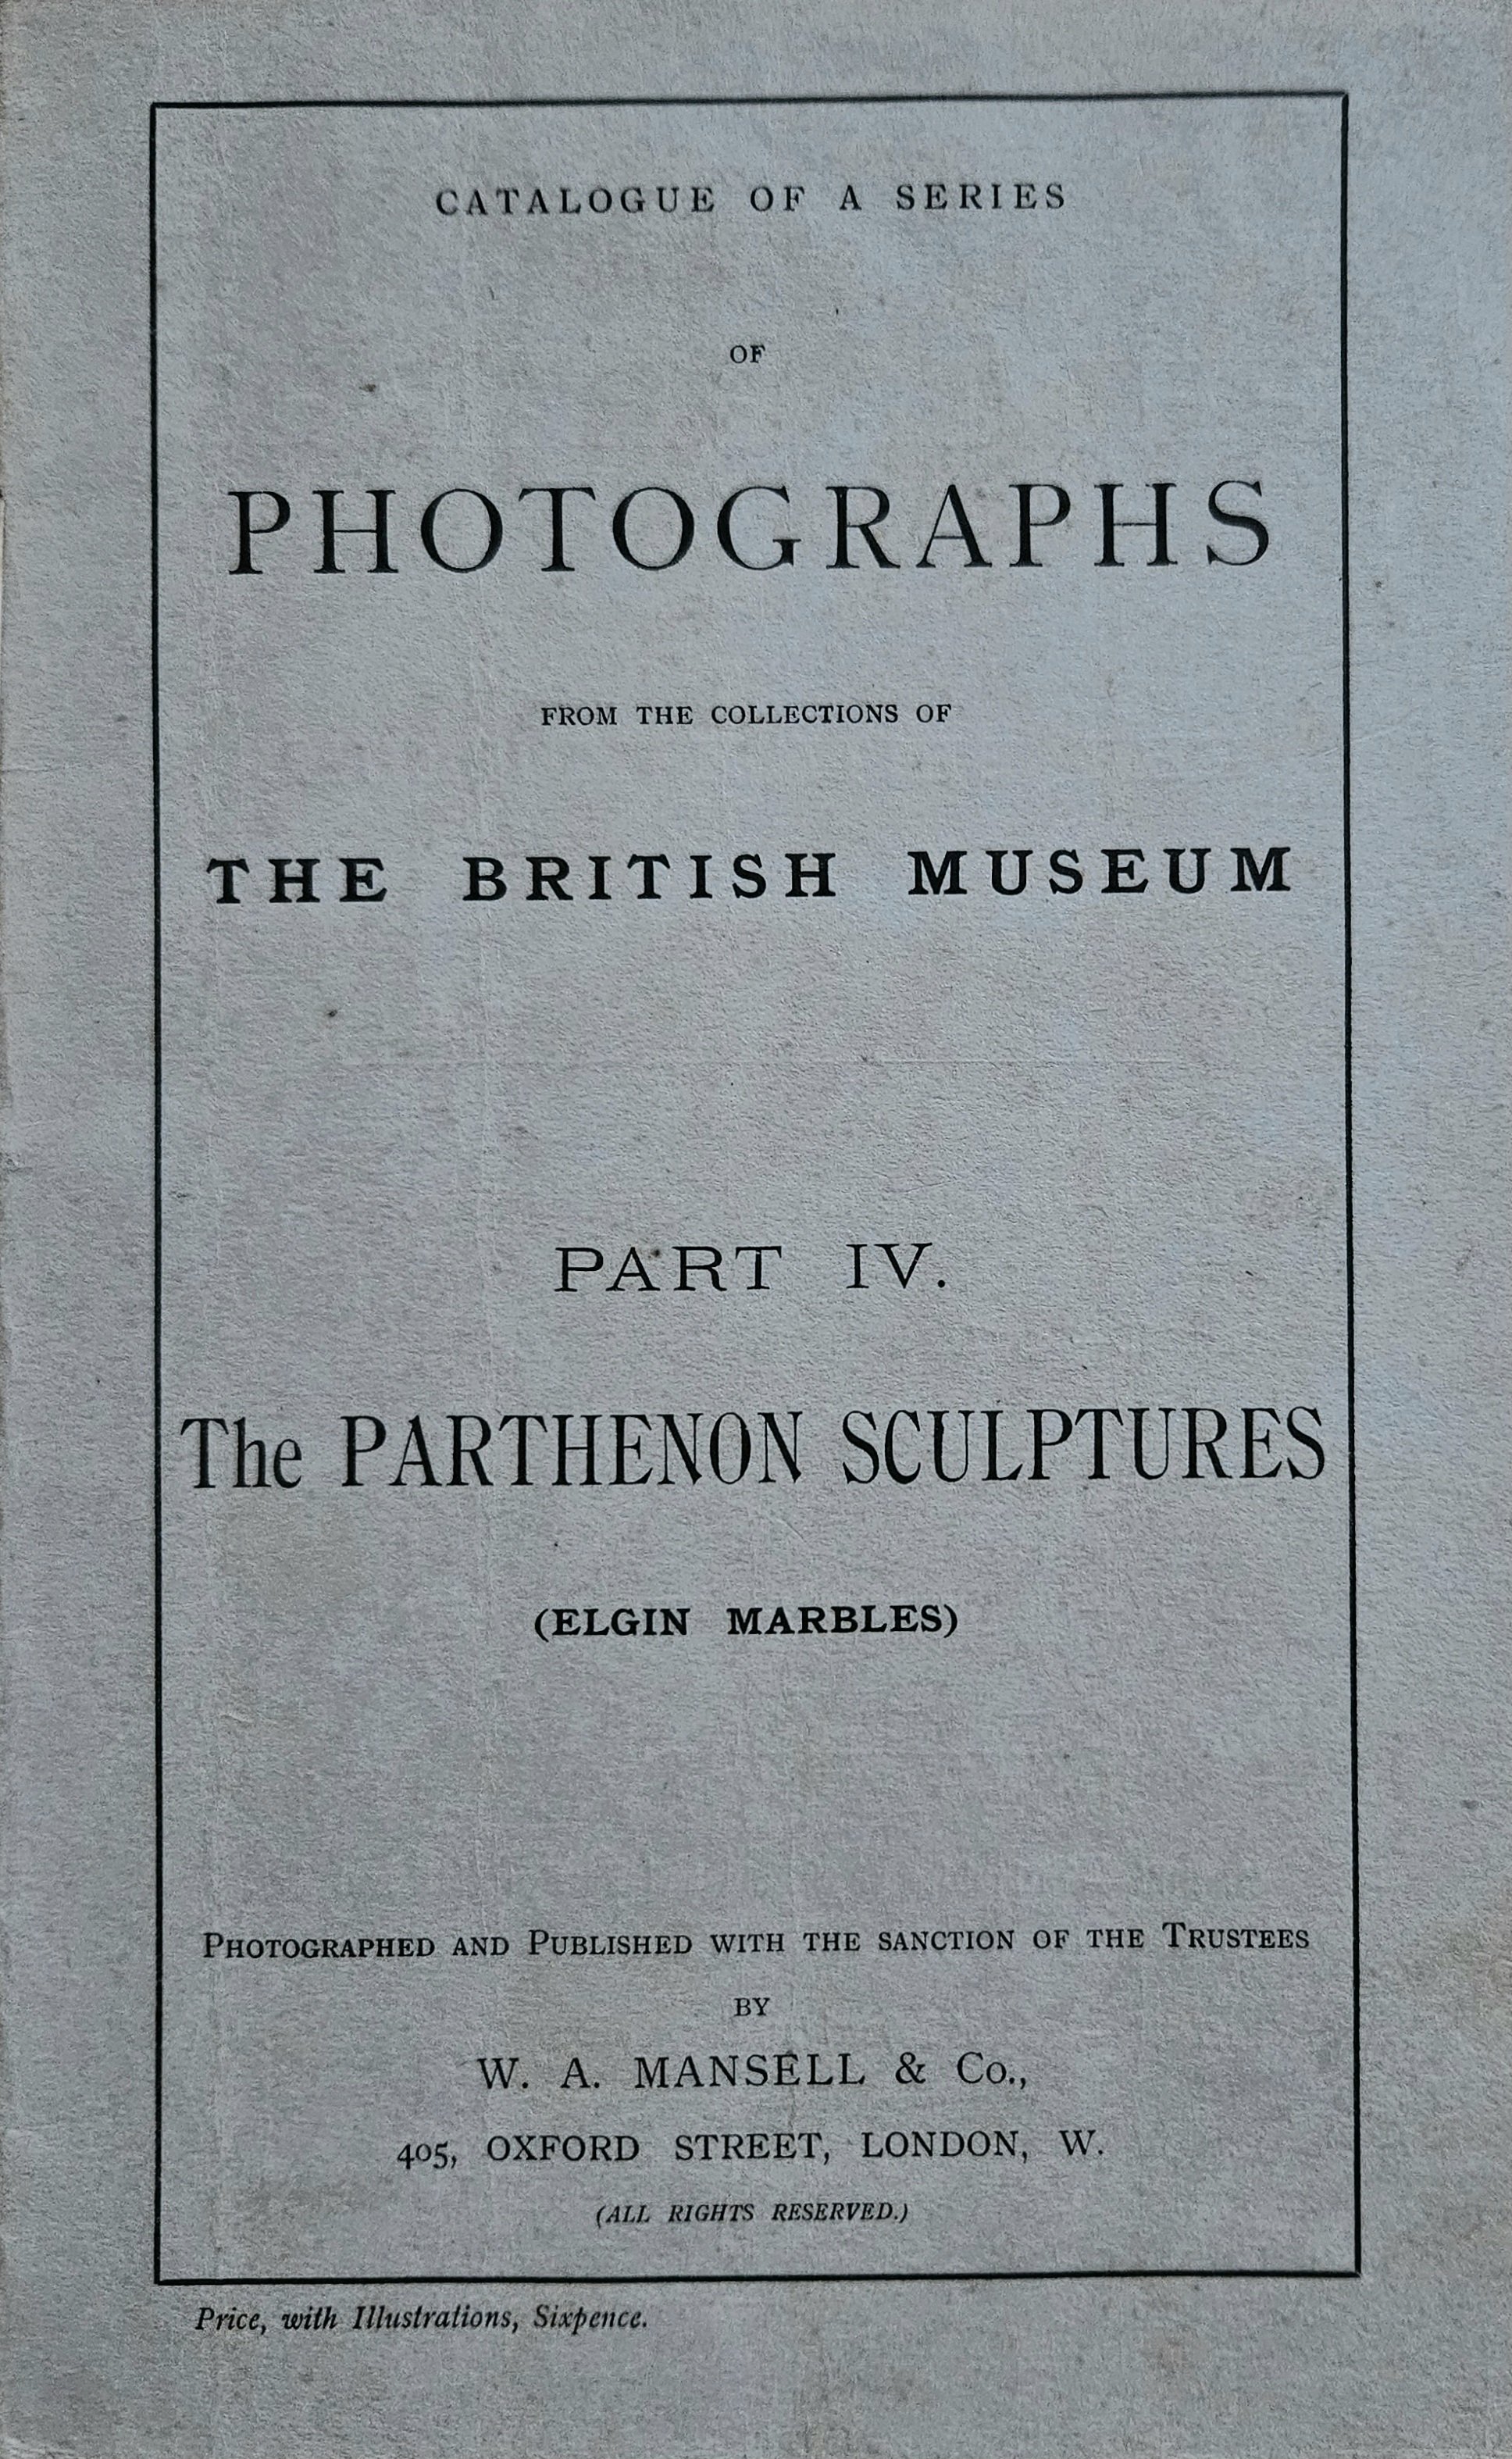 "Photographs from the Collections of the British Museum / Parthenon Sculptures" (Katalog) (Museum Naturalienkabinett Waldenburg CC BY-NC-SA)